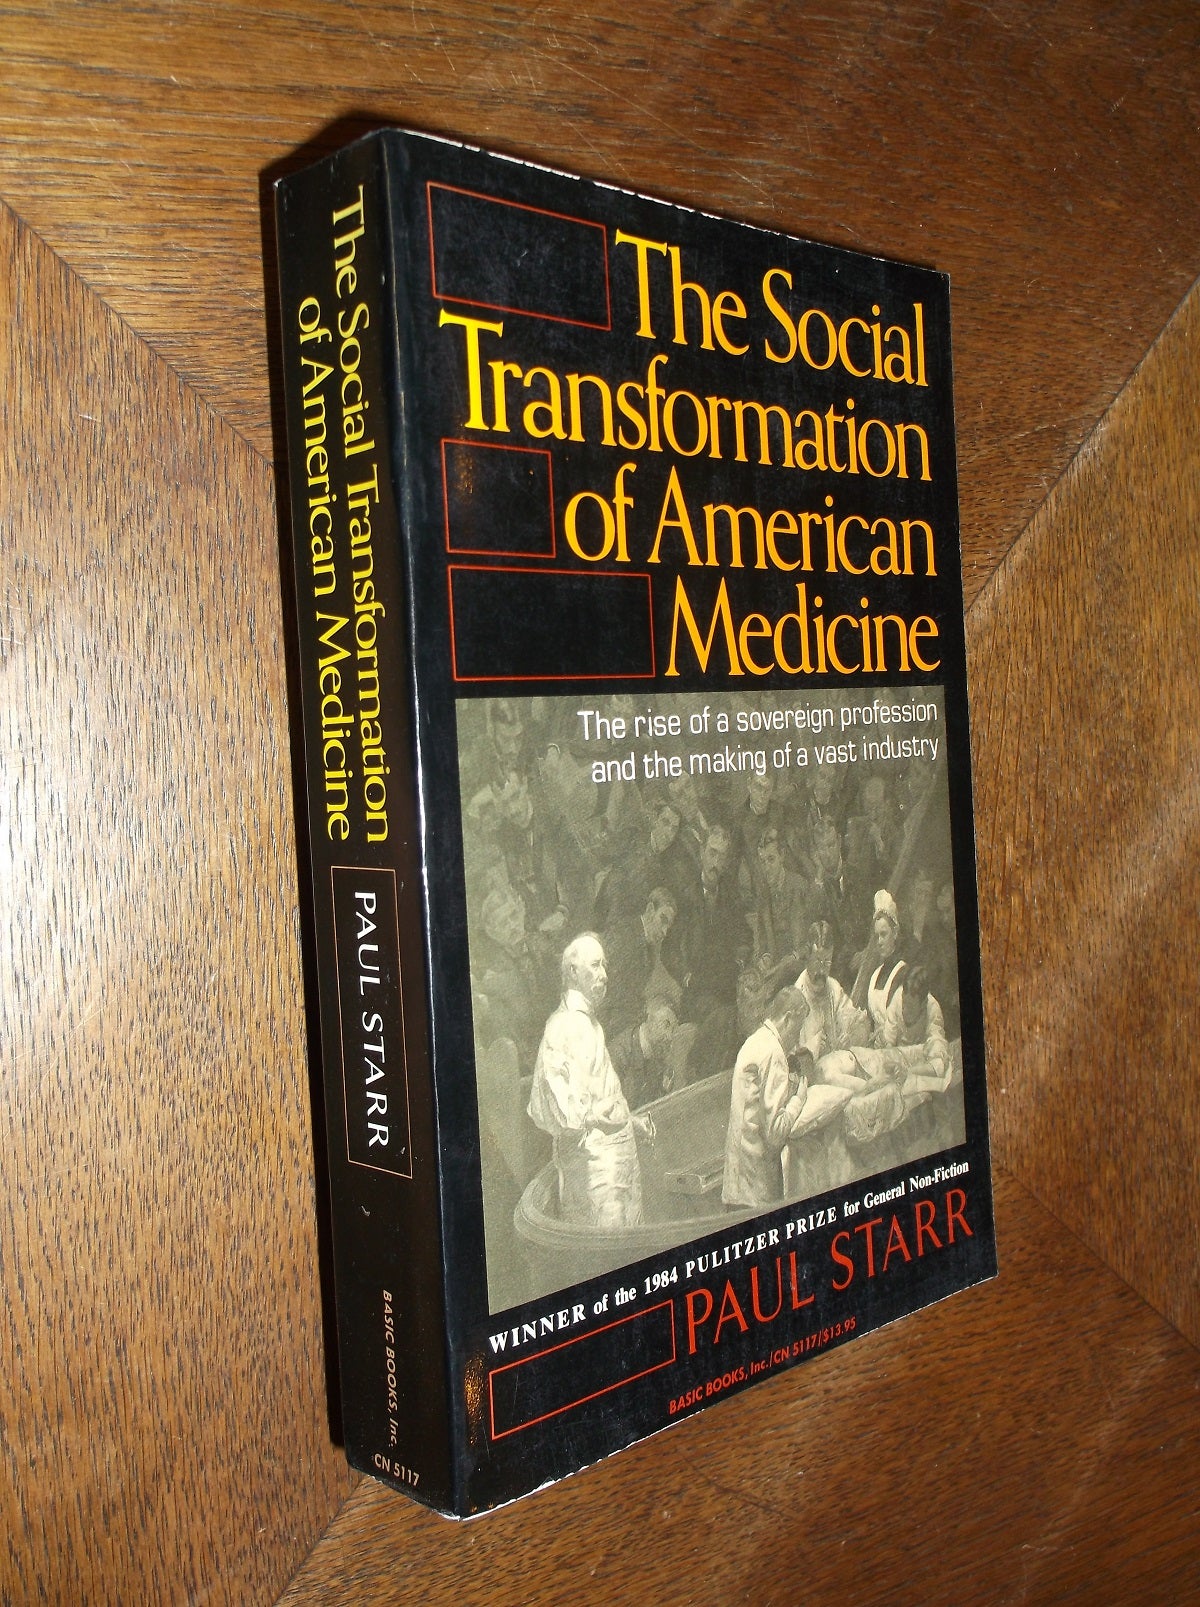 The Book of Transformations, Brown, Paul